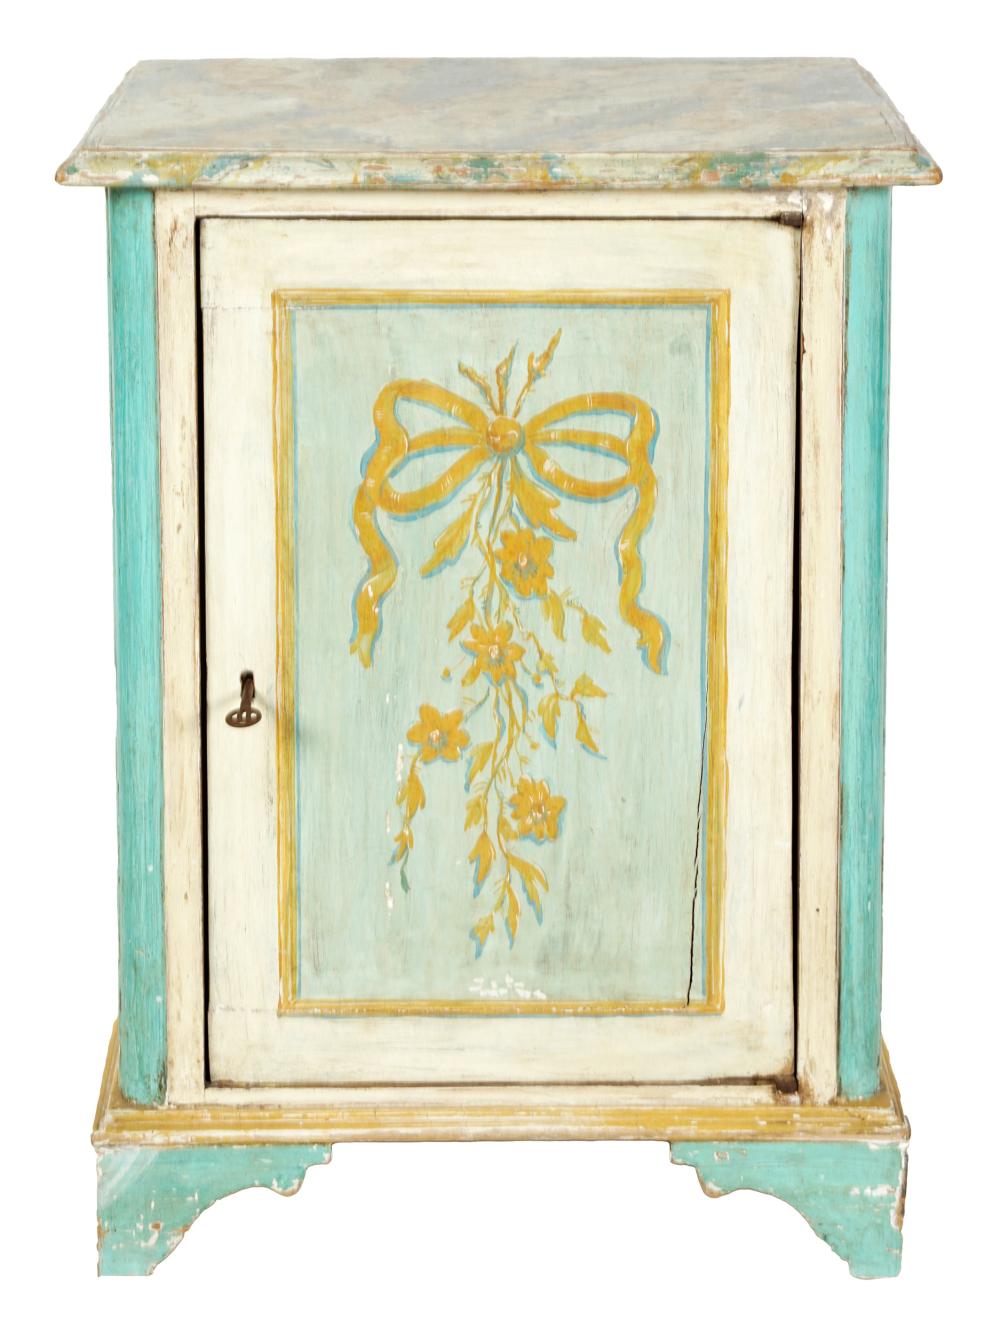 PAINTED WOOD CABINET20th century;